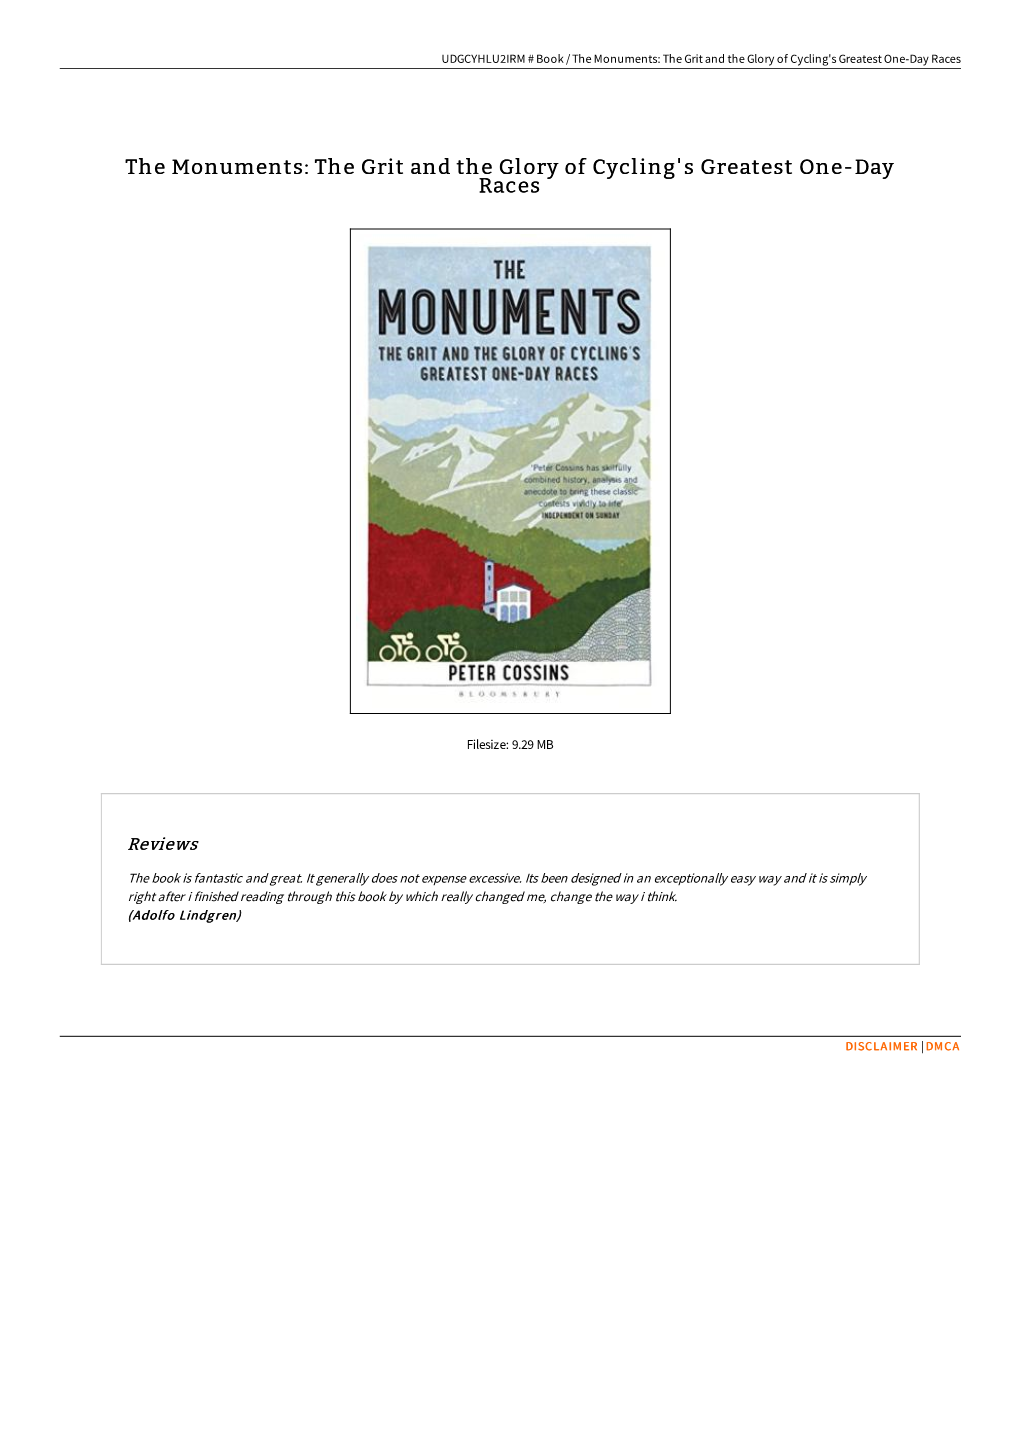 Read Ebook the Monuments: the Grit and the Glory of Cycling's